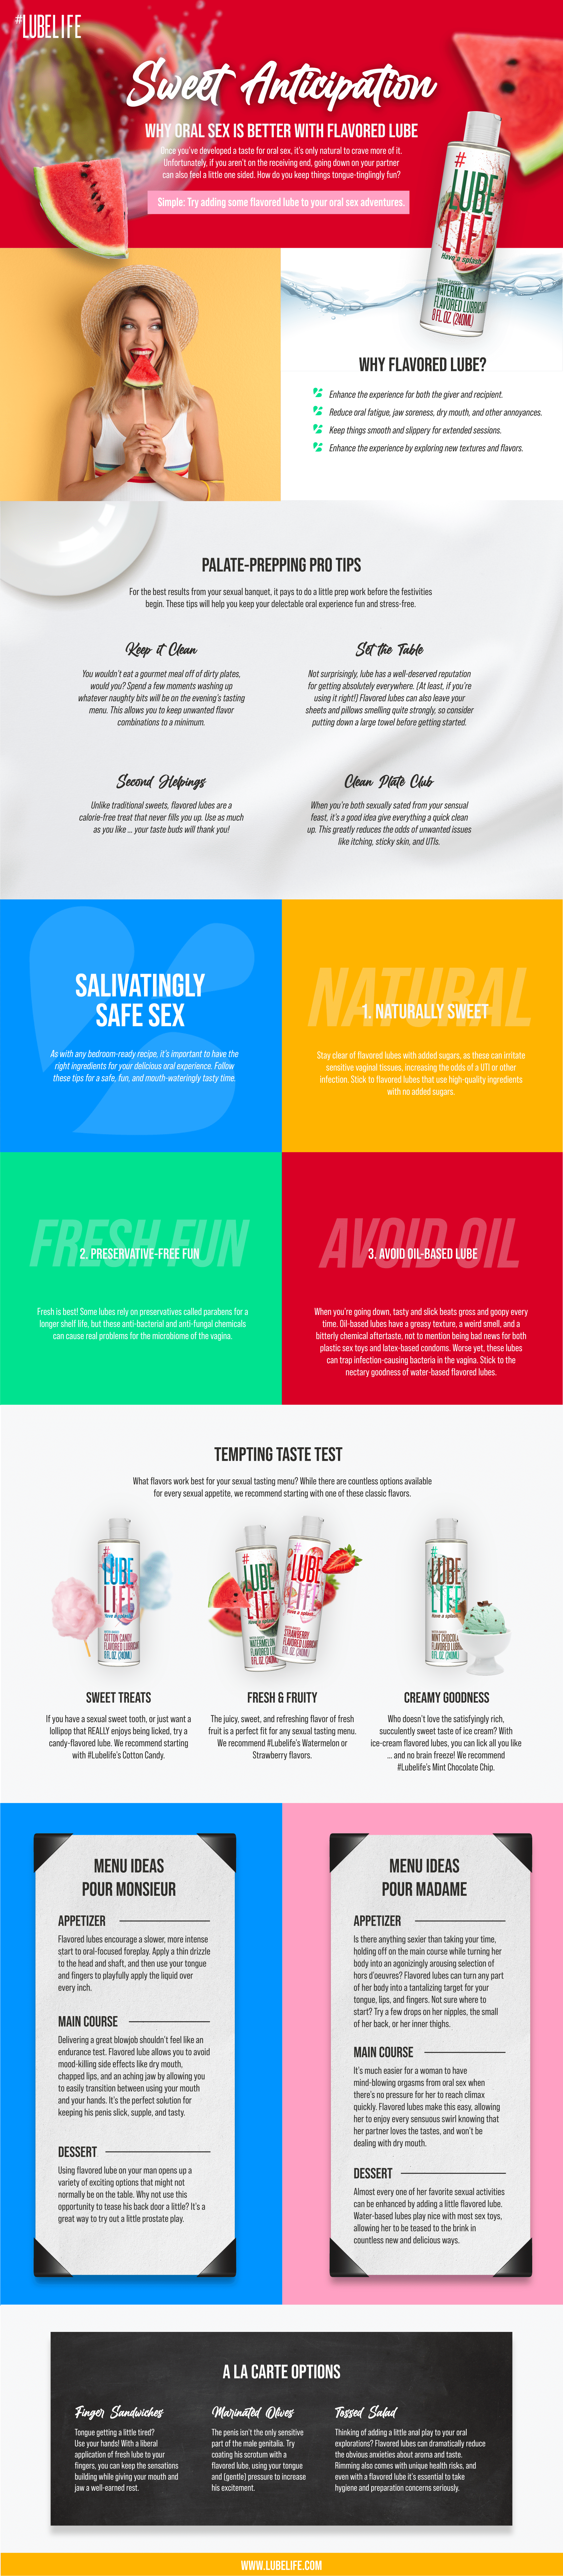 Sweet Anticipation: Why Oral Sex Is Better With Flavored Lube [INFOGRAPHIC]